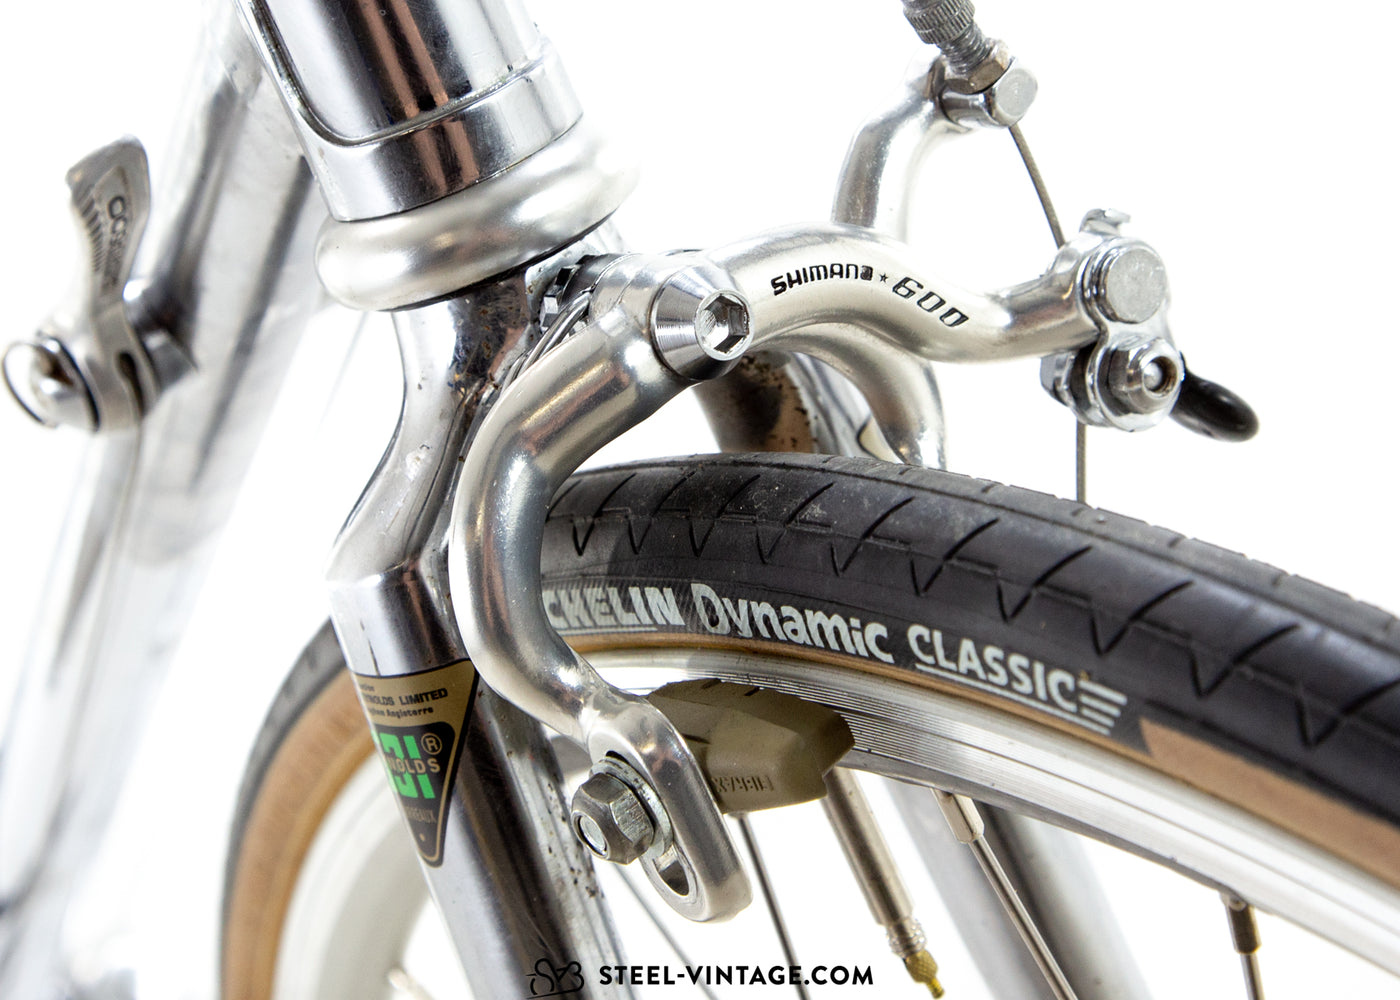 Reynolds 531 Chromed Road Bicycle 1980s